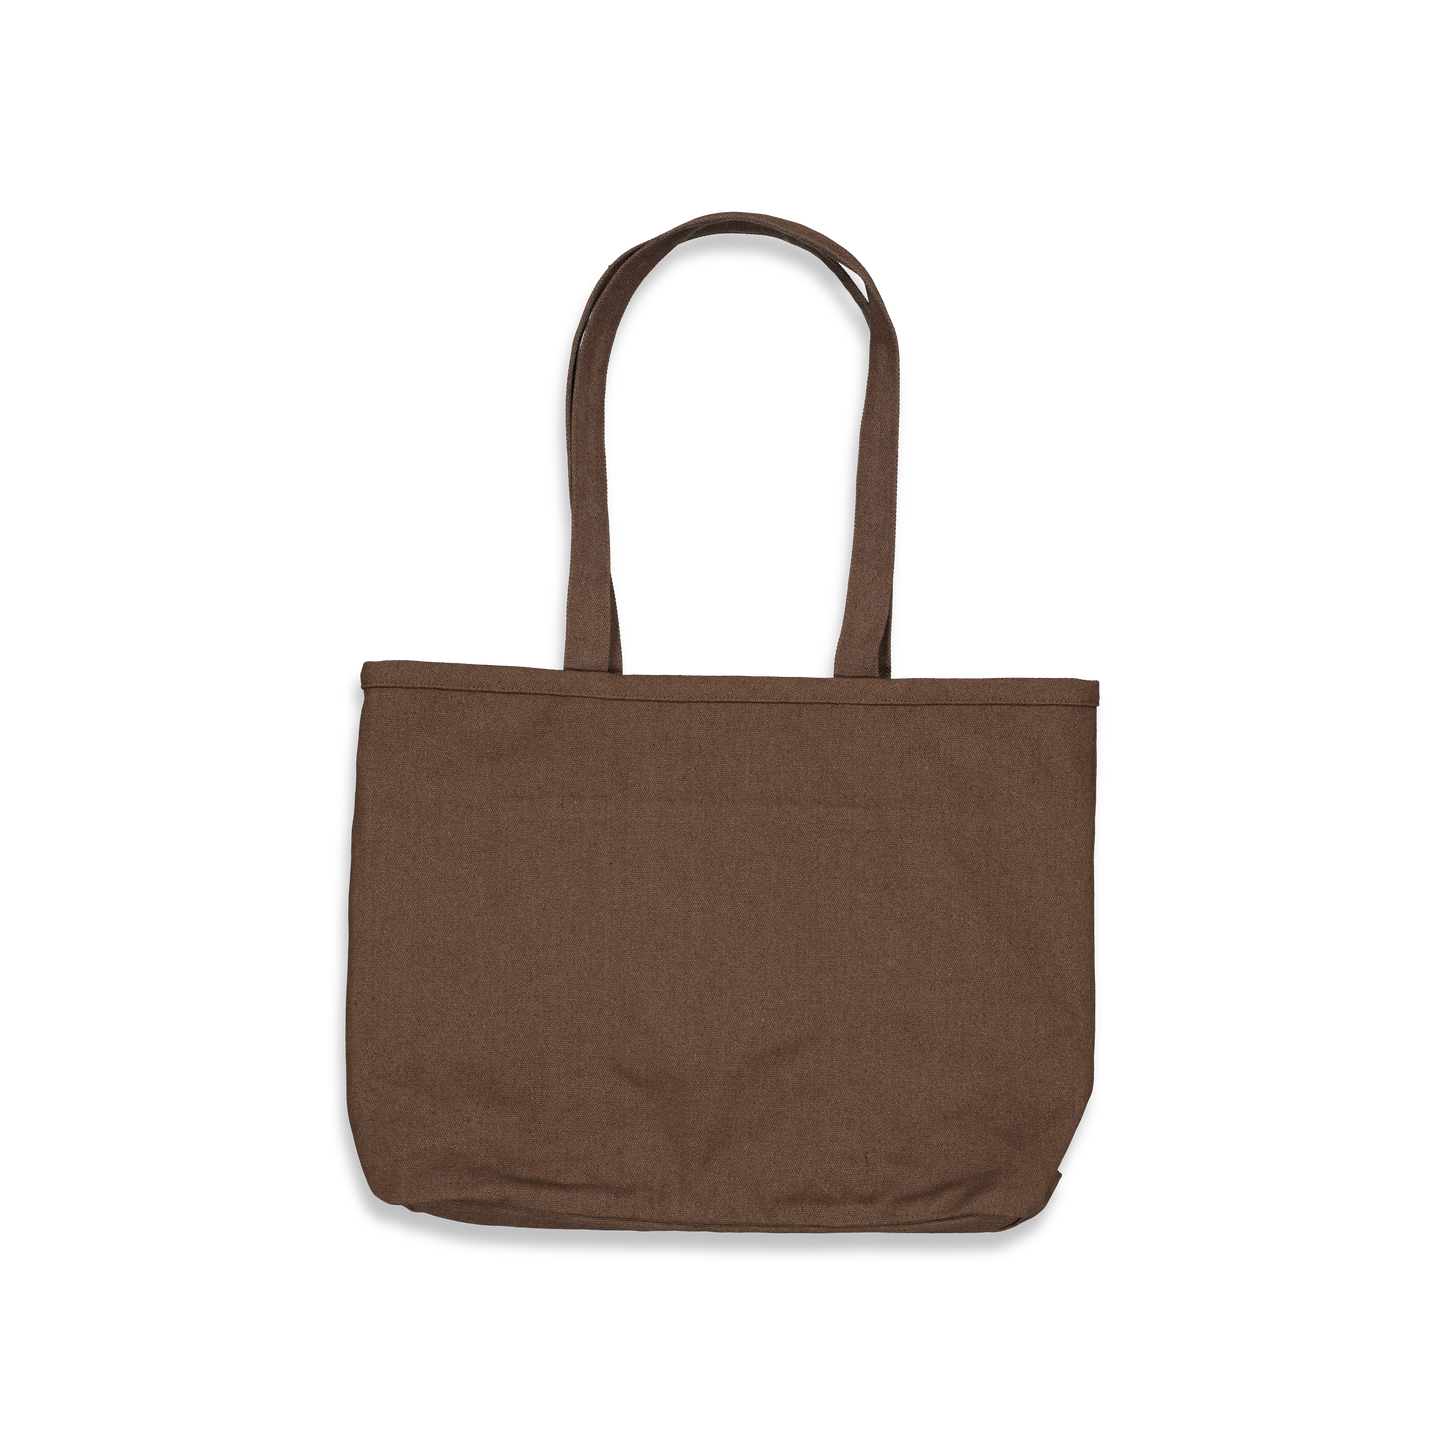 The Loose Company Chair Tote Bag